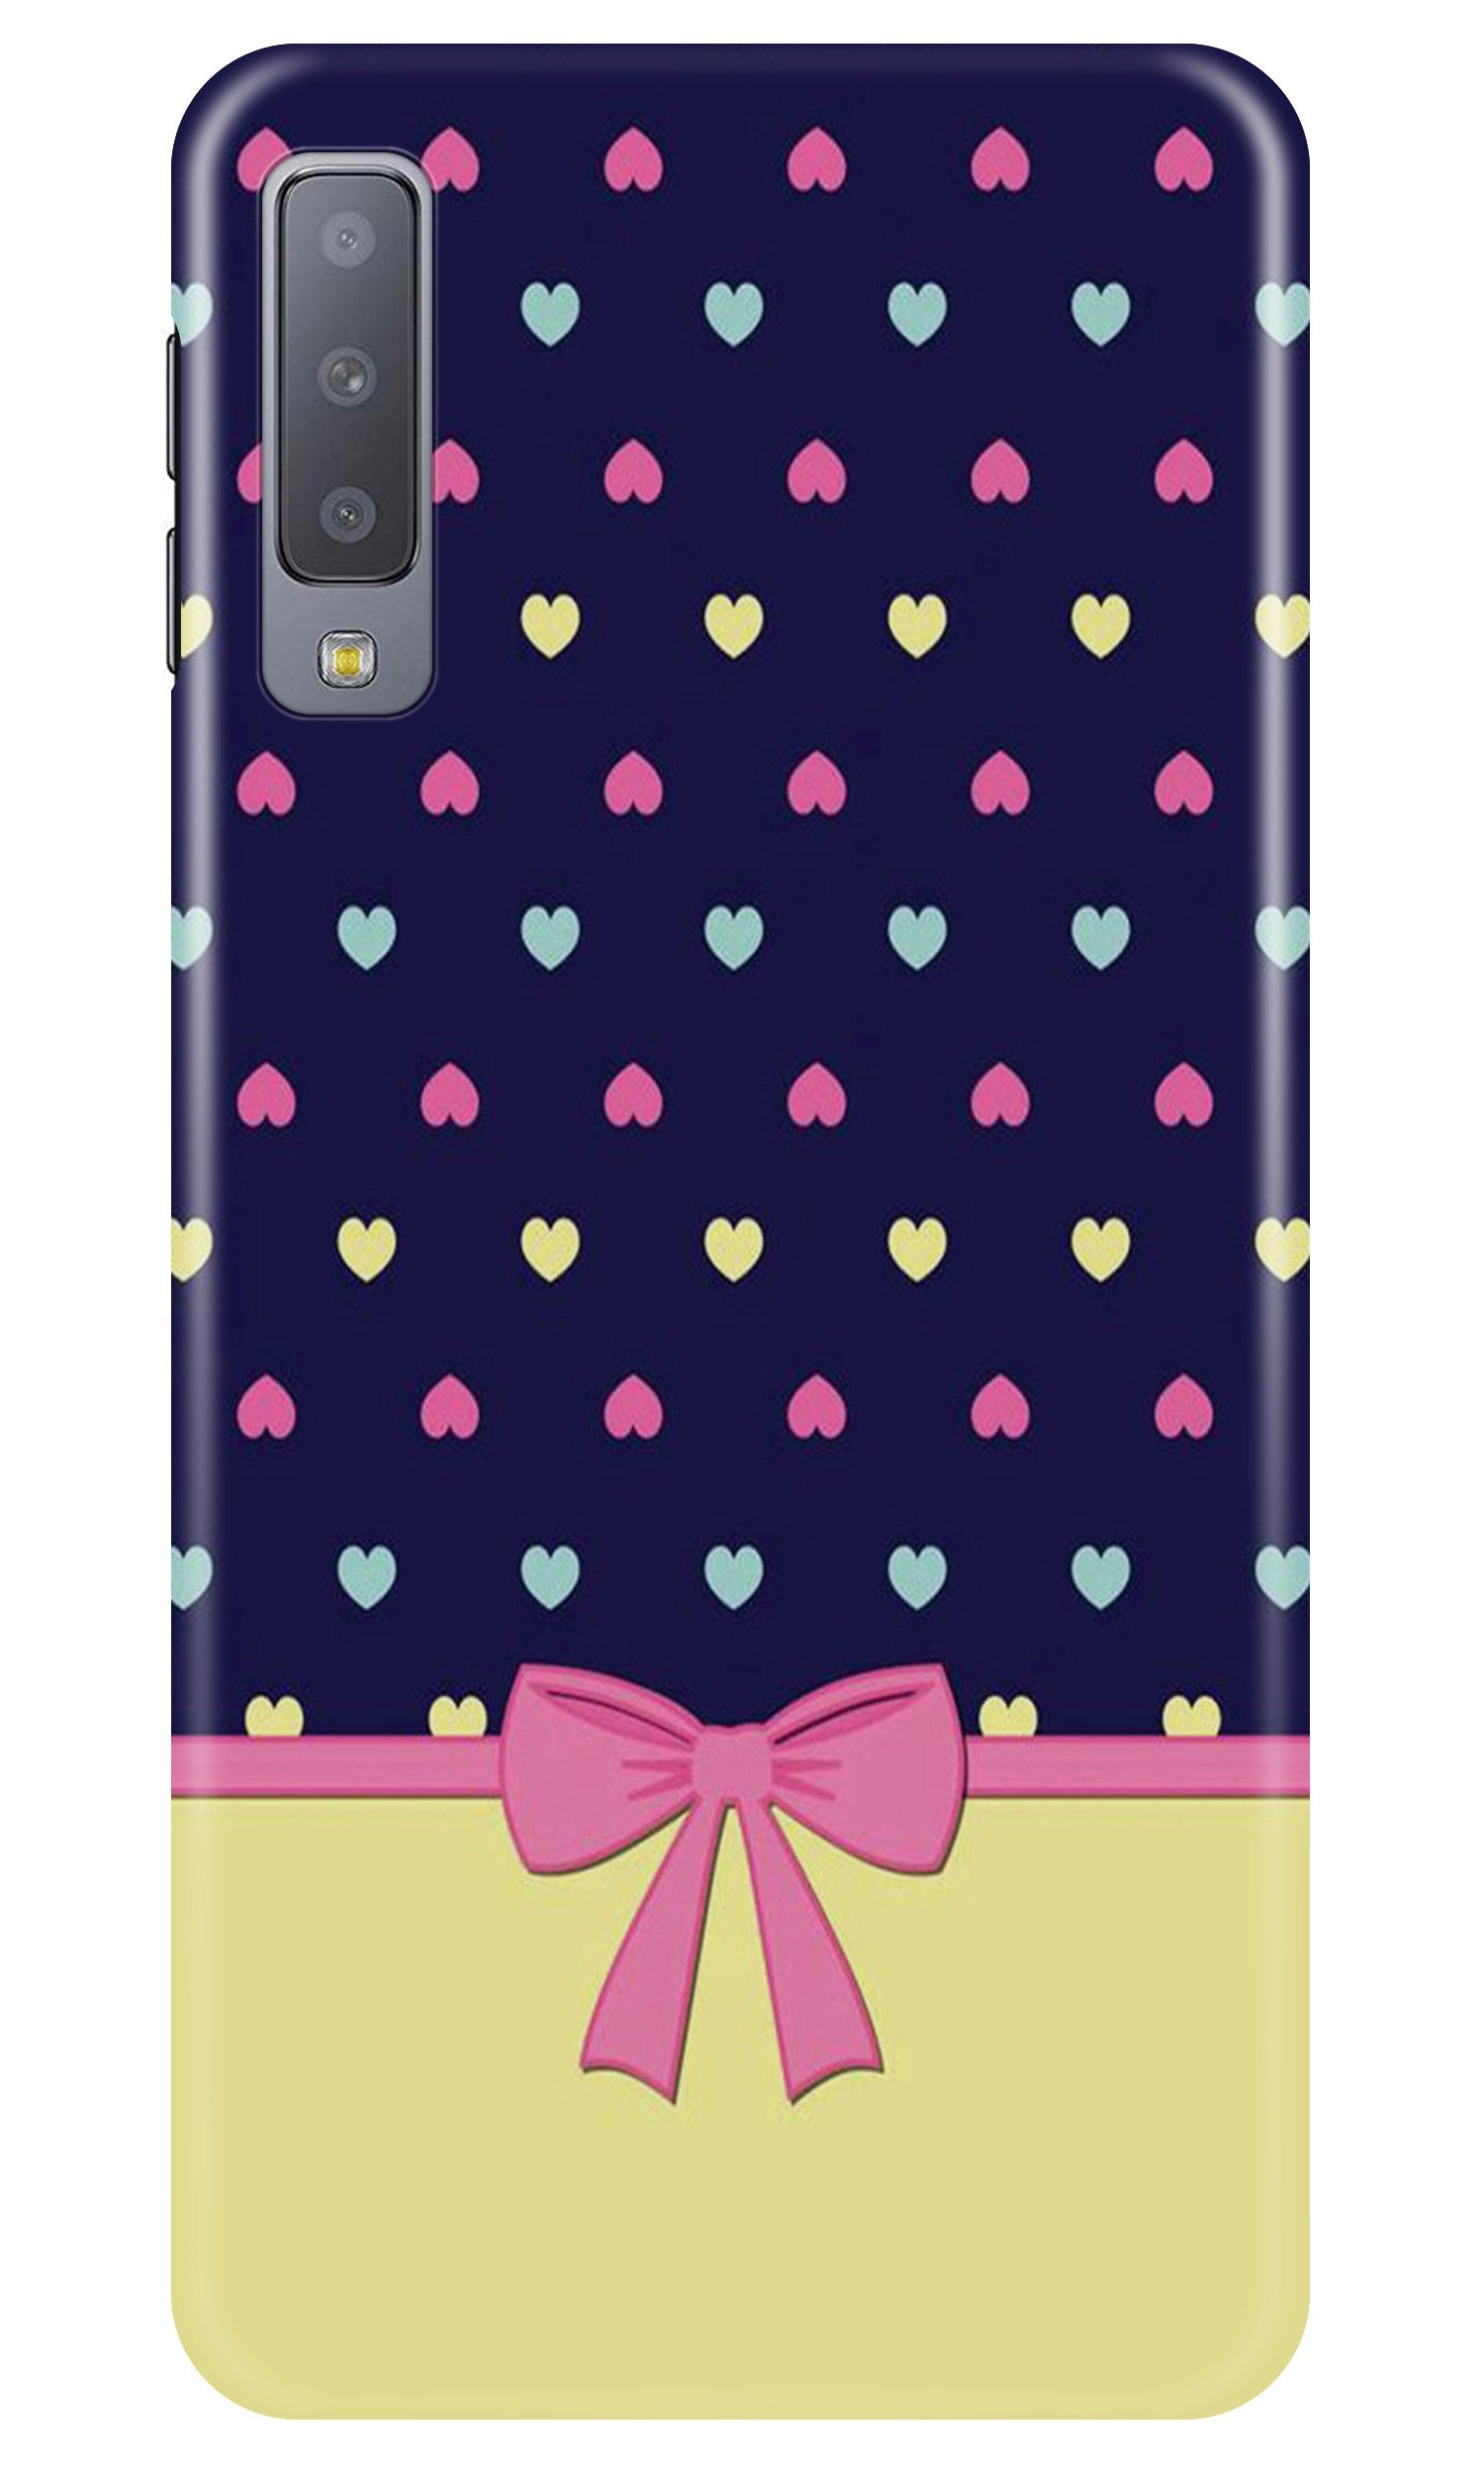 Gift Wrap5 Case for Samsung Galaxy A30s